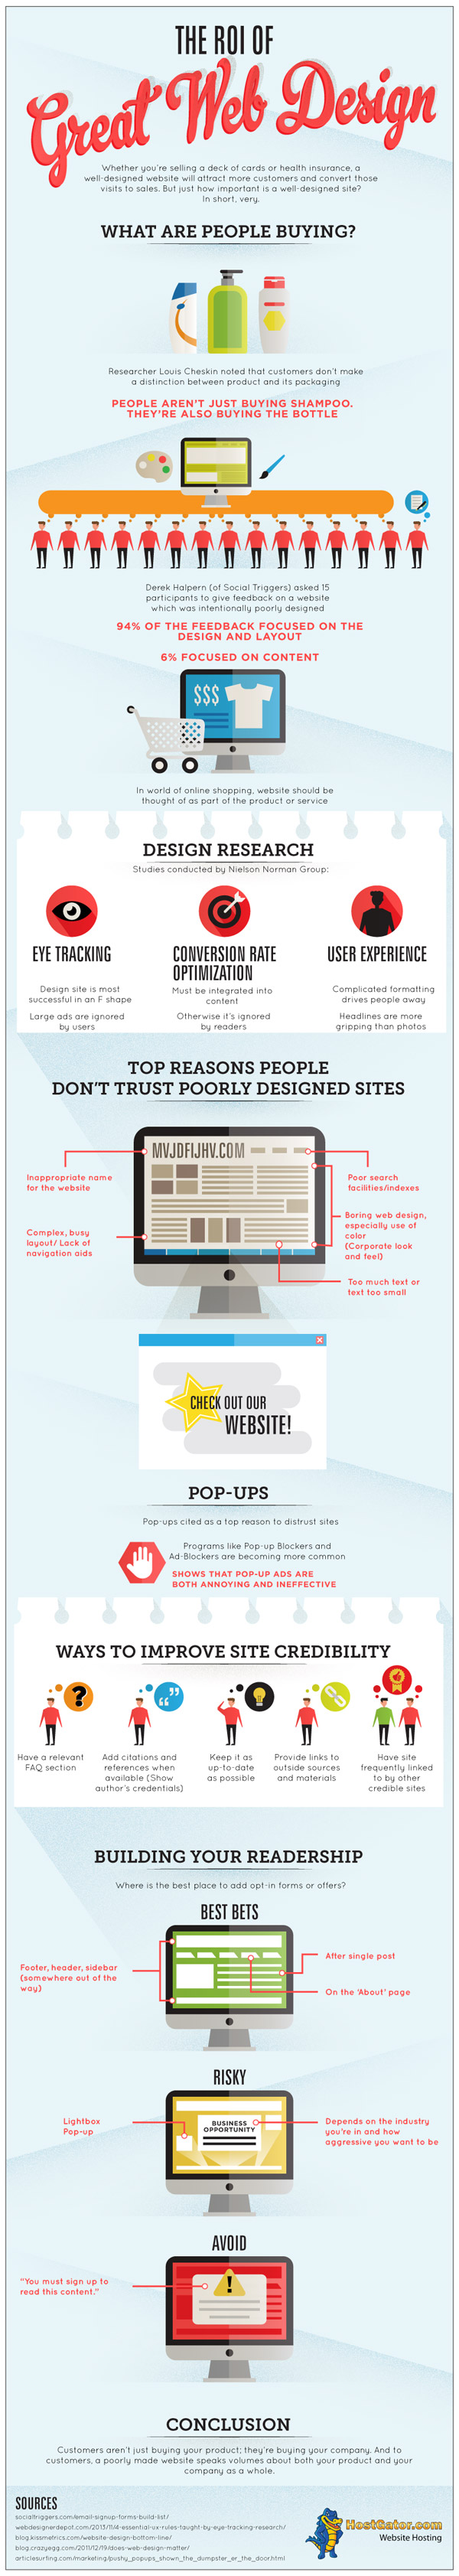 The ROI of Great Web Design by HostGator